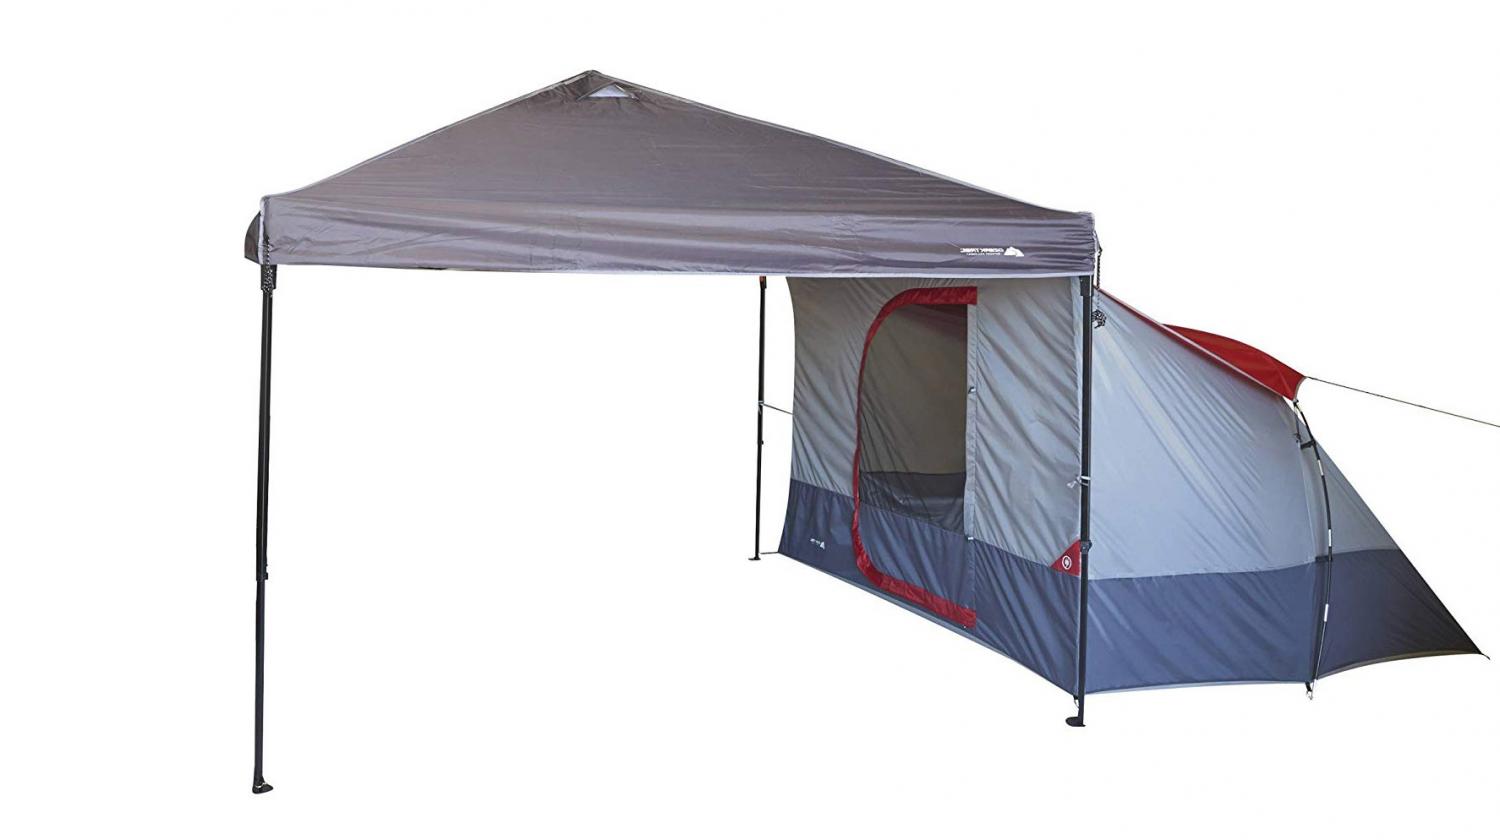 Ozark Trail Connectent 4-Person Tent Modular Tent System - Share common area under shelter